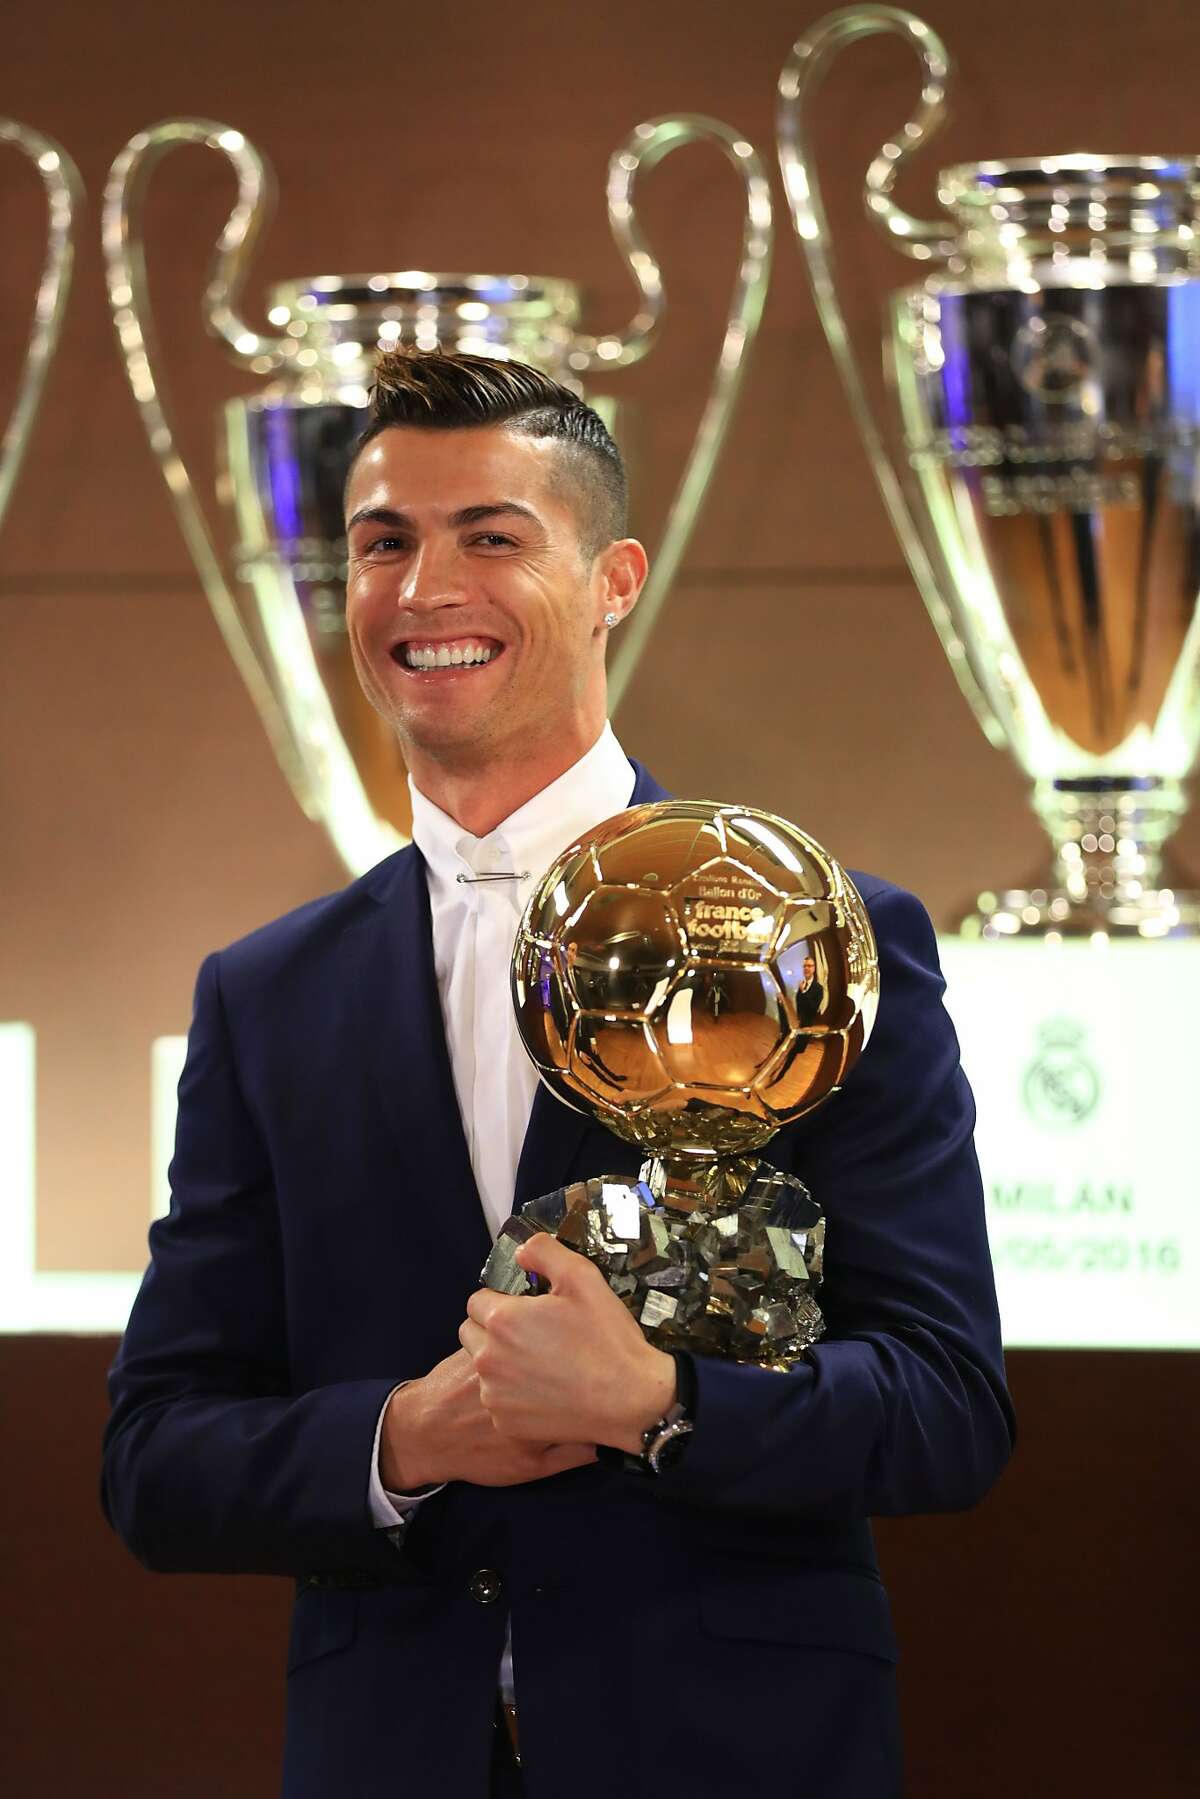 Handout photo released on December 12, 2016 by L'Equipe shows Portugese player Cristiano Ronaldo posing with the Ballon d'Or France Football trophy in Madrid. Cristiano Ronaldo was named winner of the Ballon d'Or on December 12, 2016 for the fourth time, organisers France Football said, capping a terrific year for the Real Madrid star. / AFP PHOTO / L'EQUIPE / FRANCK SEGUIN / RESTRICTED TO EDITORIAL USE - MANDATORY CREDIT "AFP PHOTO / FRANCK SEGUIN / LEQUIPE" - NO MARKETING NO ADVERTISING CAMPAIGNS - DISTRIBUTED AS A SERVICE TO CLIENTS FRANCK SEGUIN/AFP/Getty Images